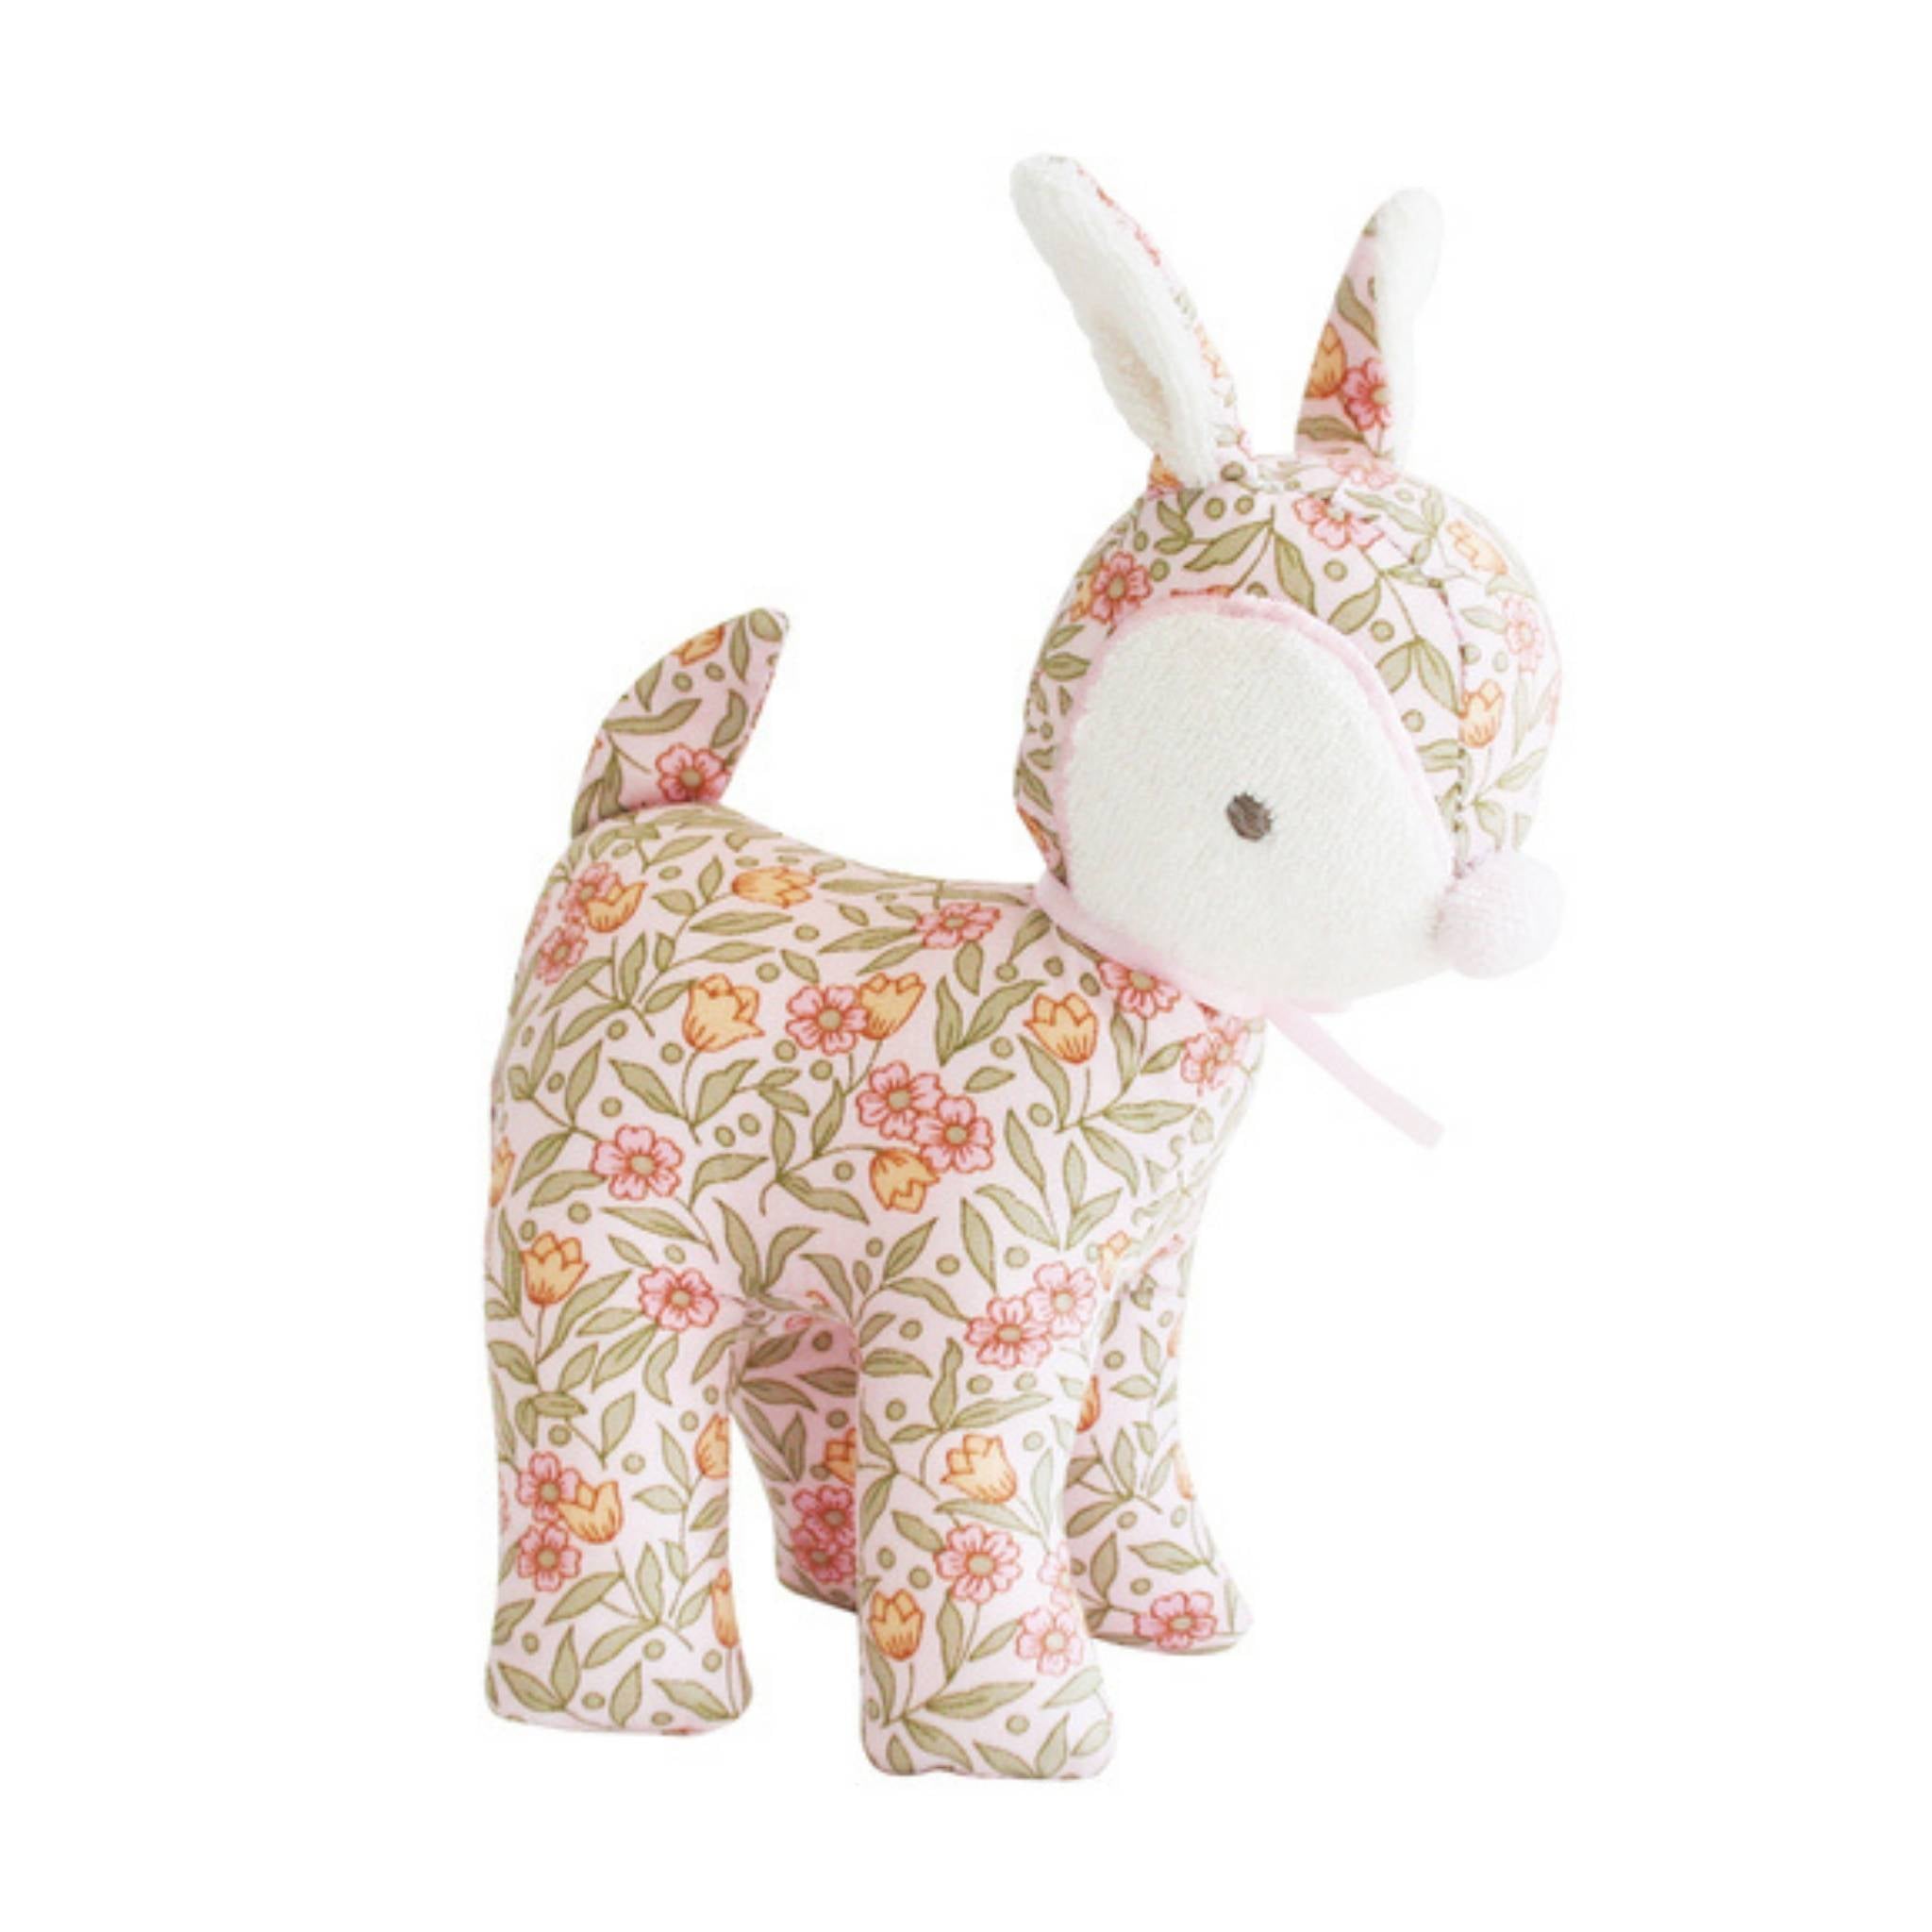 Alimrose Baby Deer Rattle - Blossom Lily Pink